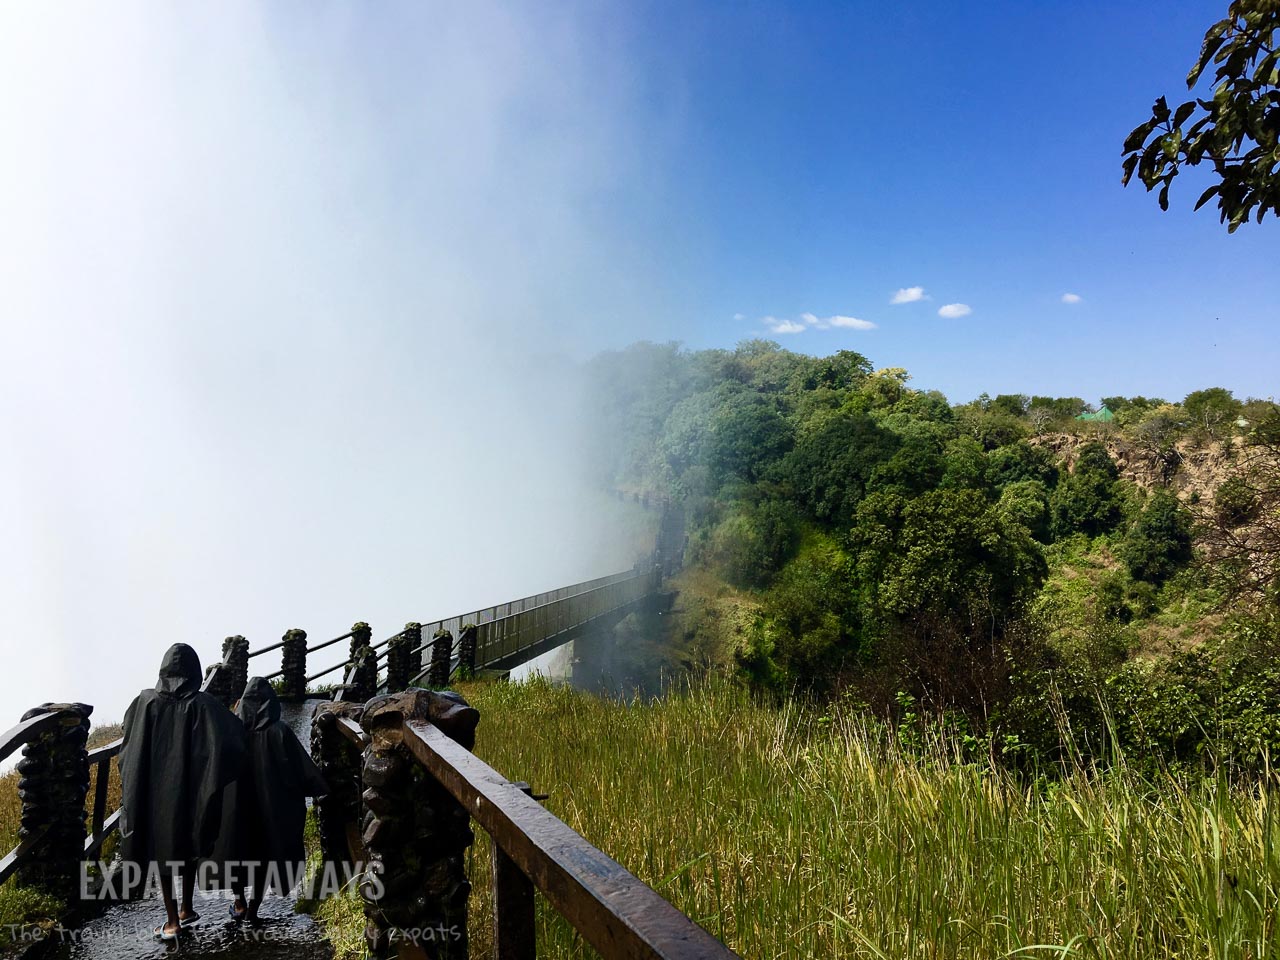 You will get wet! The spray from Victoria Falls engulfs the Knife's Edge Bridge. Victoria Falls, Livingstone, Zambia. 